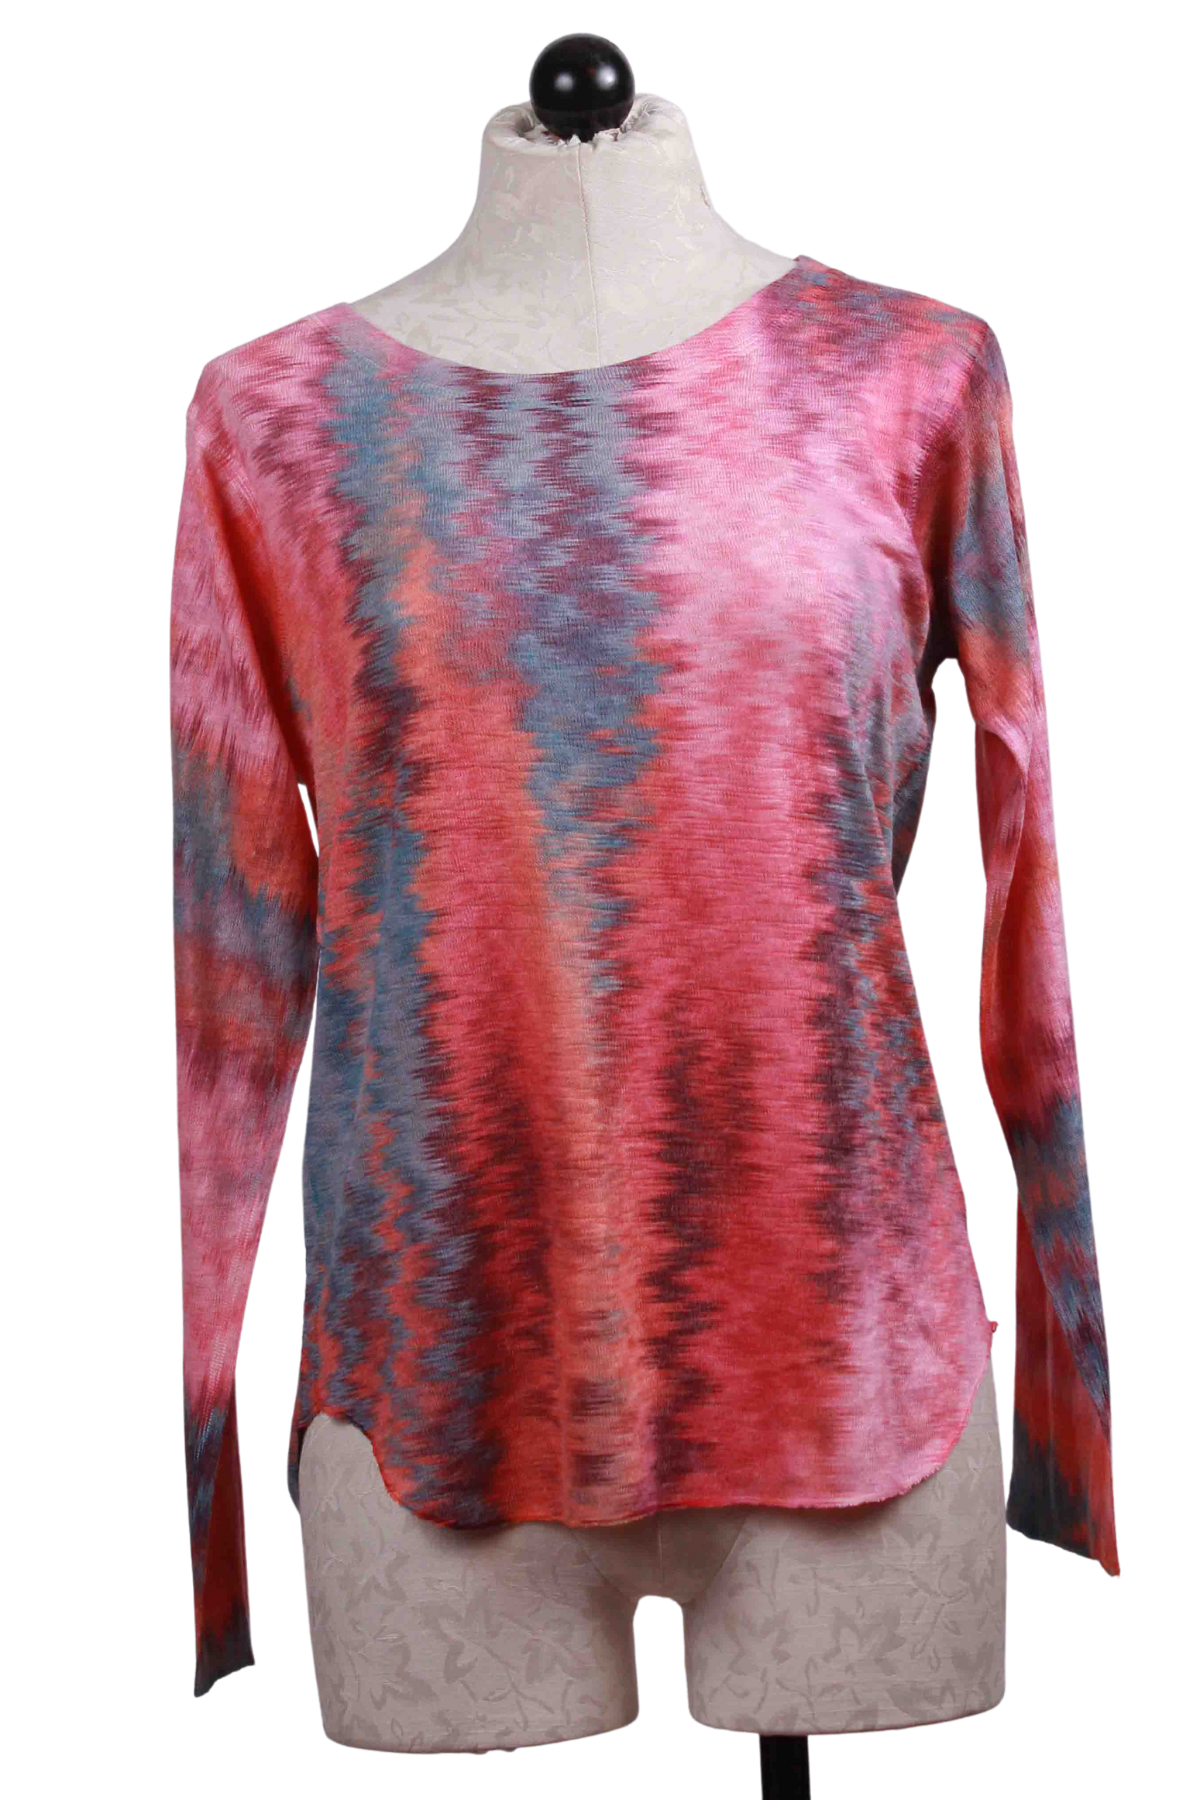 multicolored Zig Zag Print Top by Nally and Millie